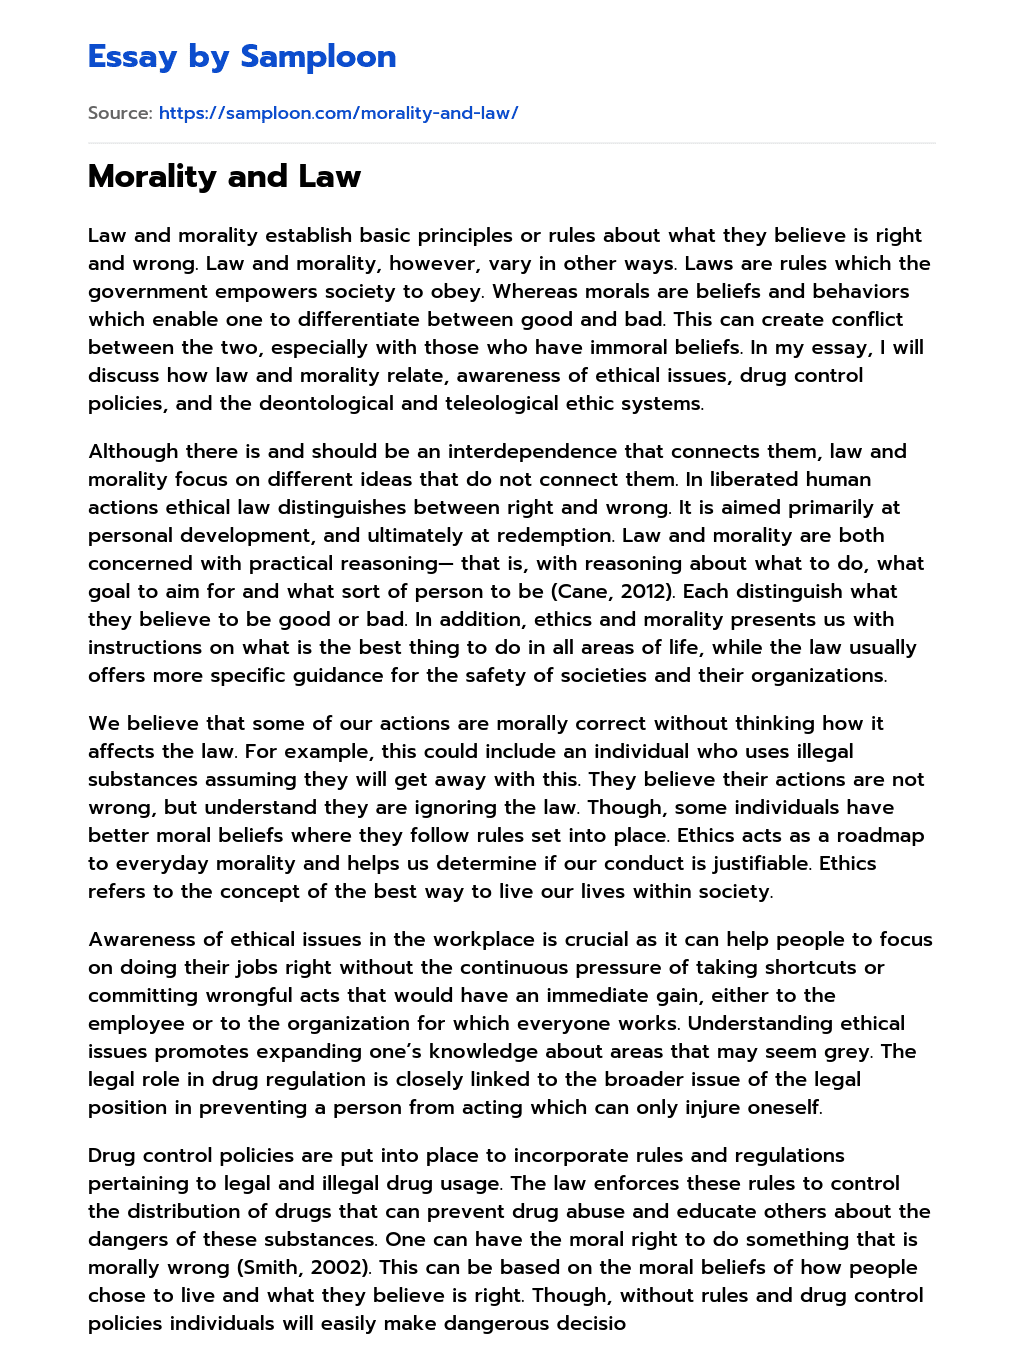 Morality and Law essay